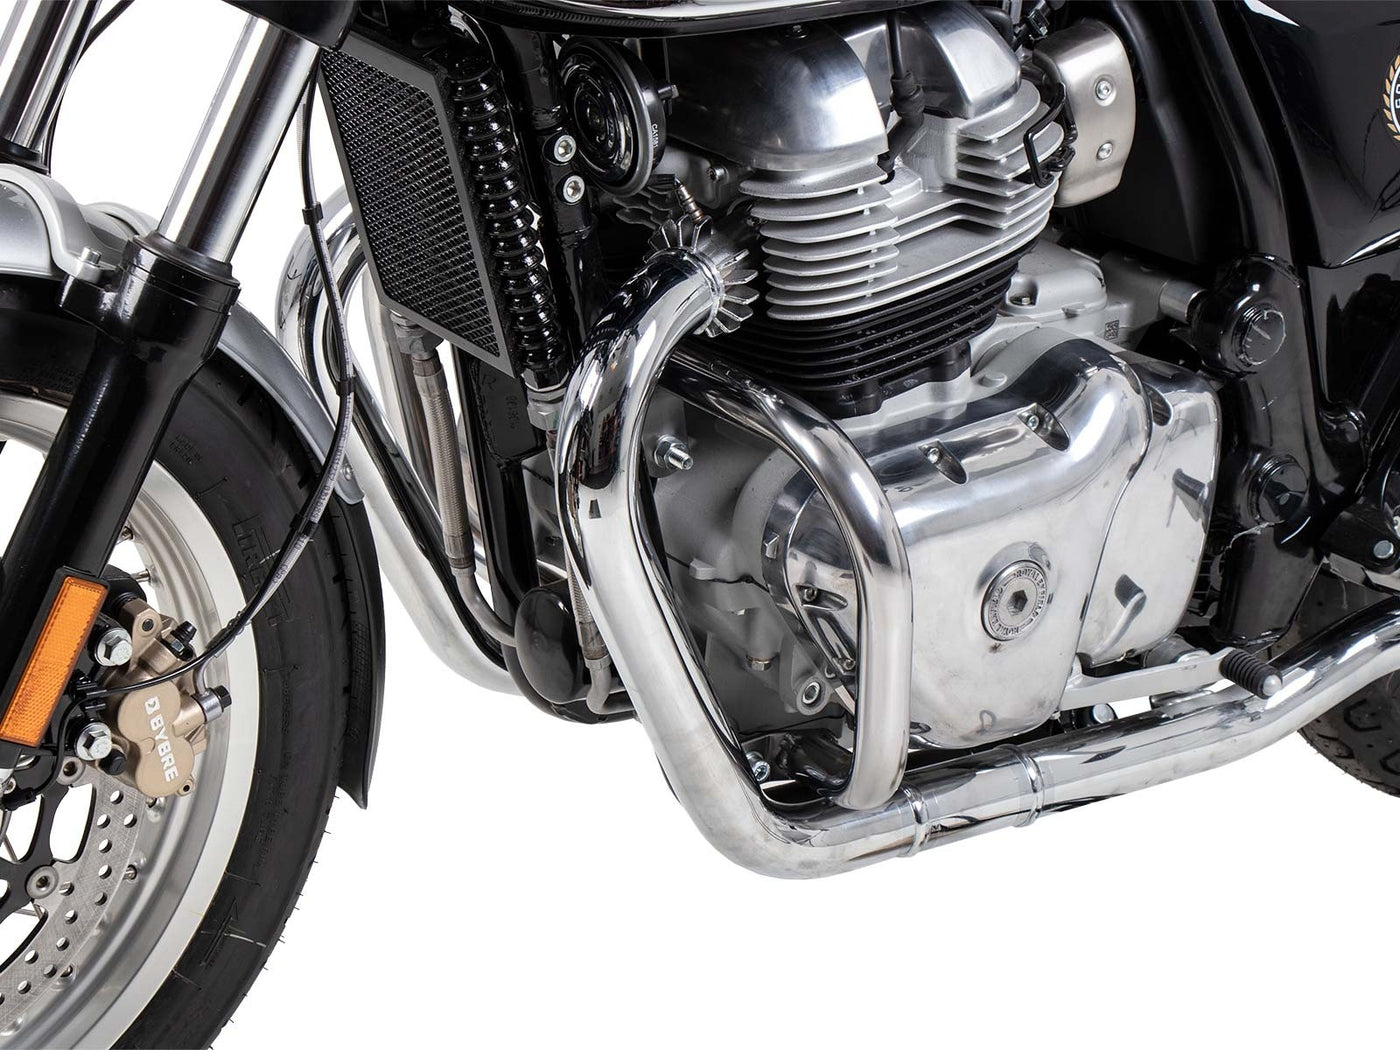 Engine Protection Bar (Chrome) for ROYAL ENFIELD Interceptor 650 & Continental 650 / GT